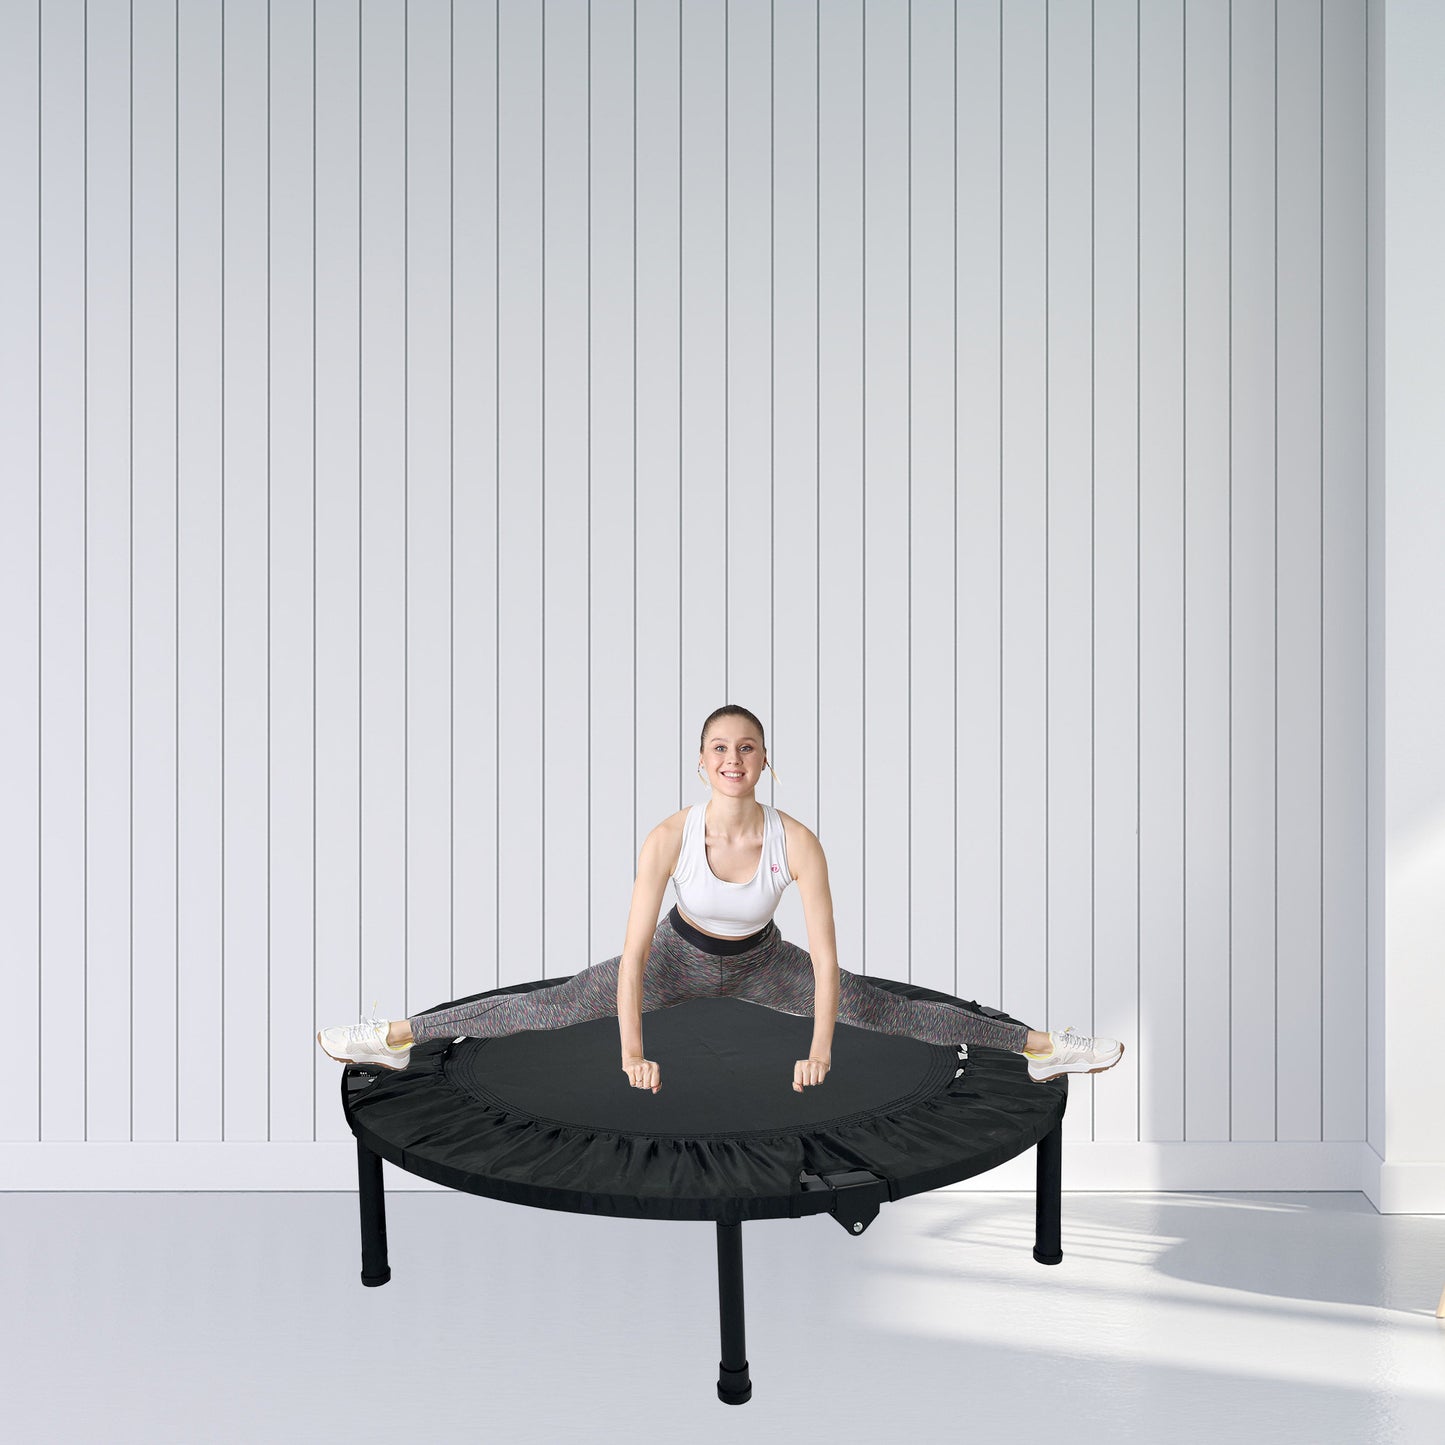  40-inch Mini Exercise Trampoline for Adults or Kids